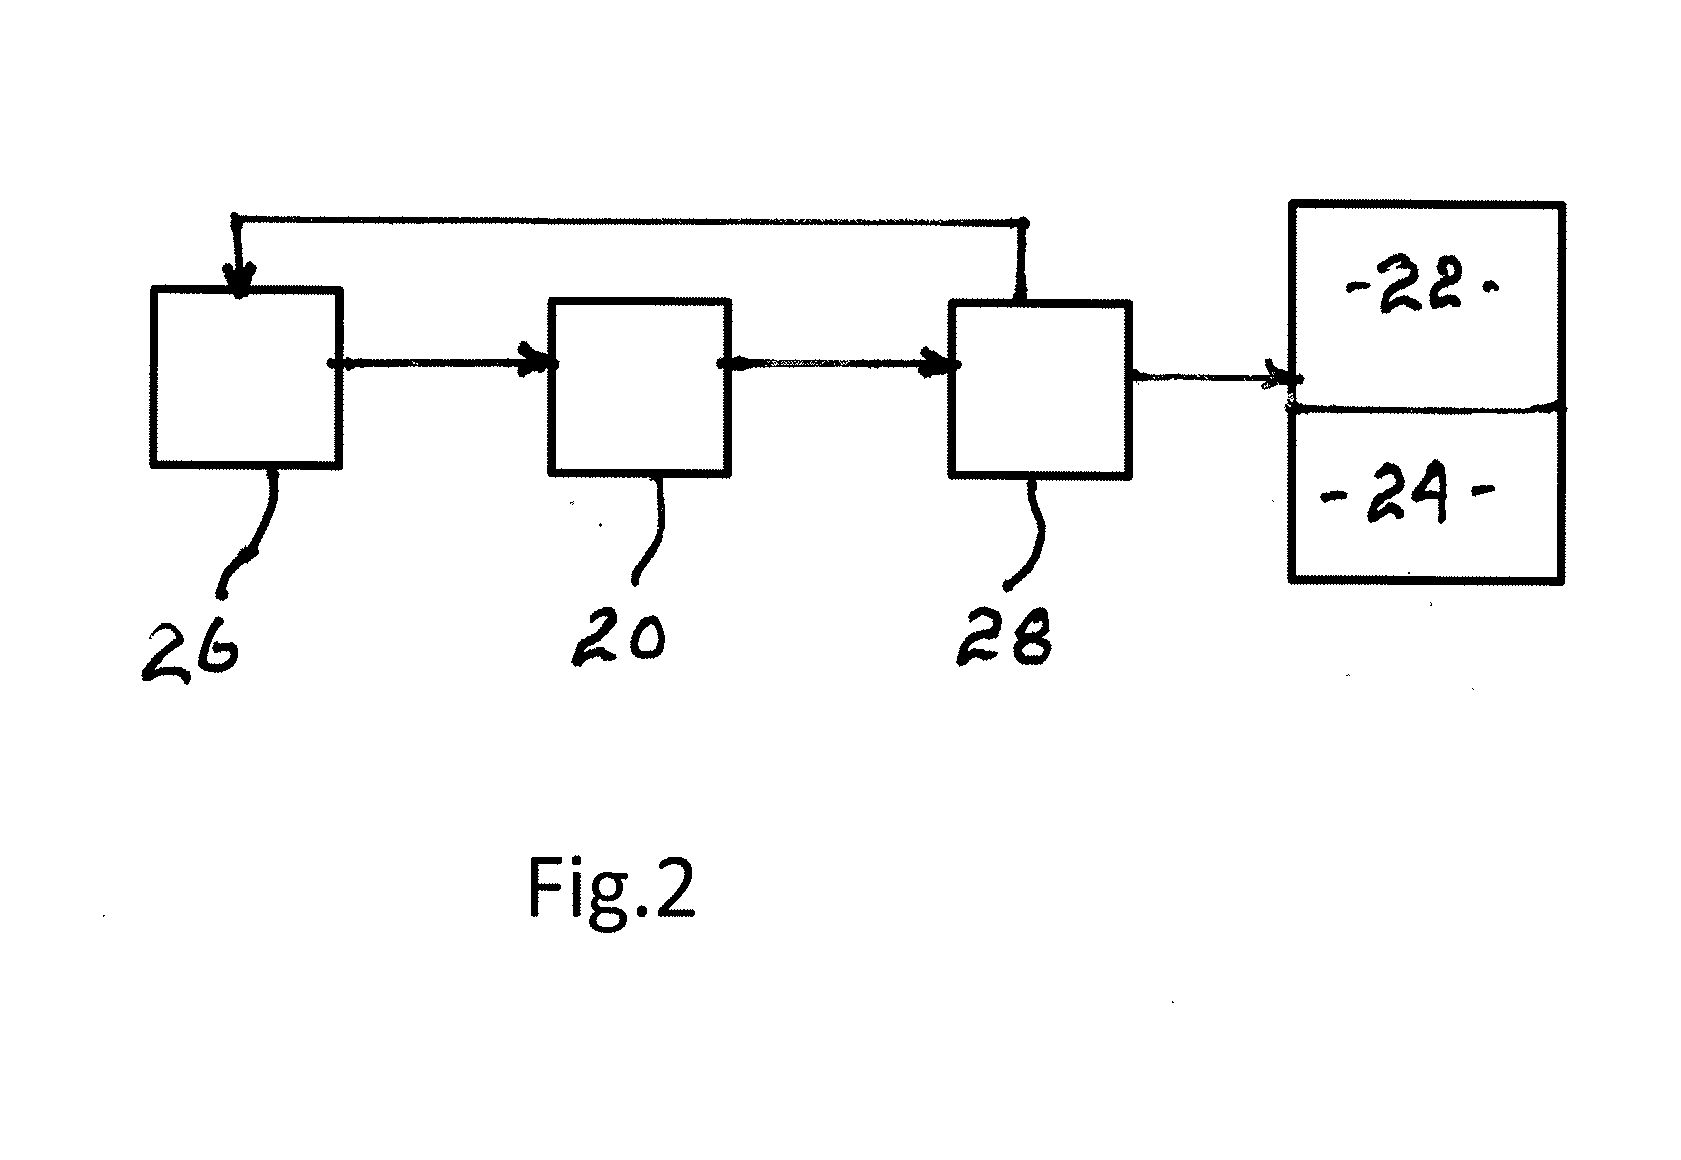 Method and Apparatus for Producing Full Synchronization of a Digital File with a Live Event